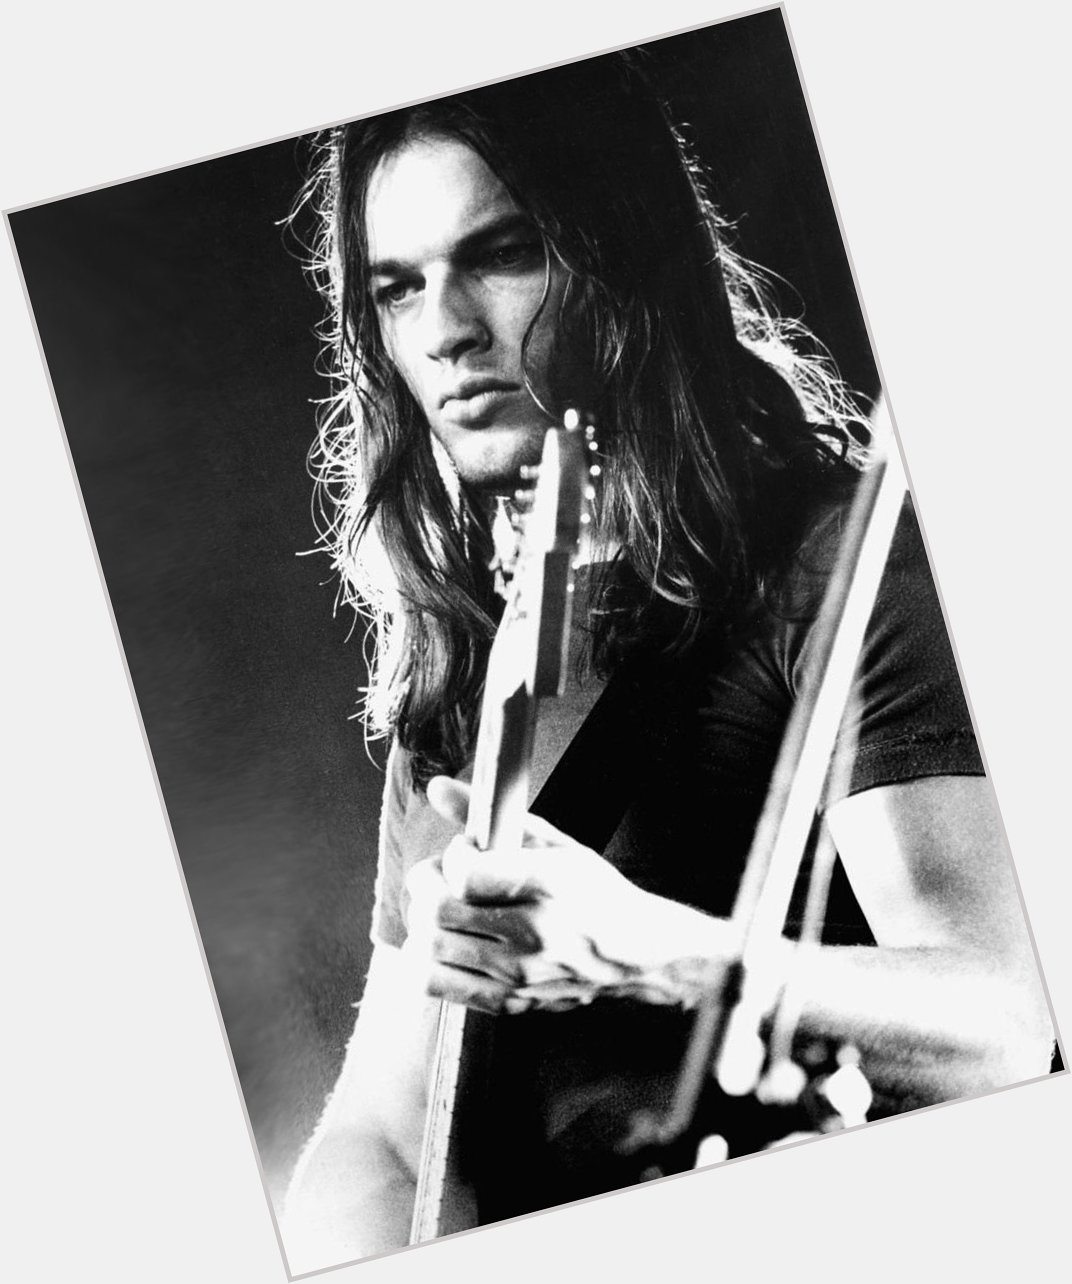 Happy Birthday to Pink Floyd\s David Gilmour, turning 72 today! One of the greatest musicians of all time. 